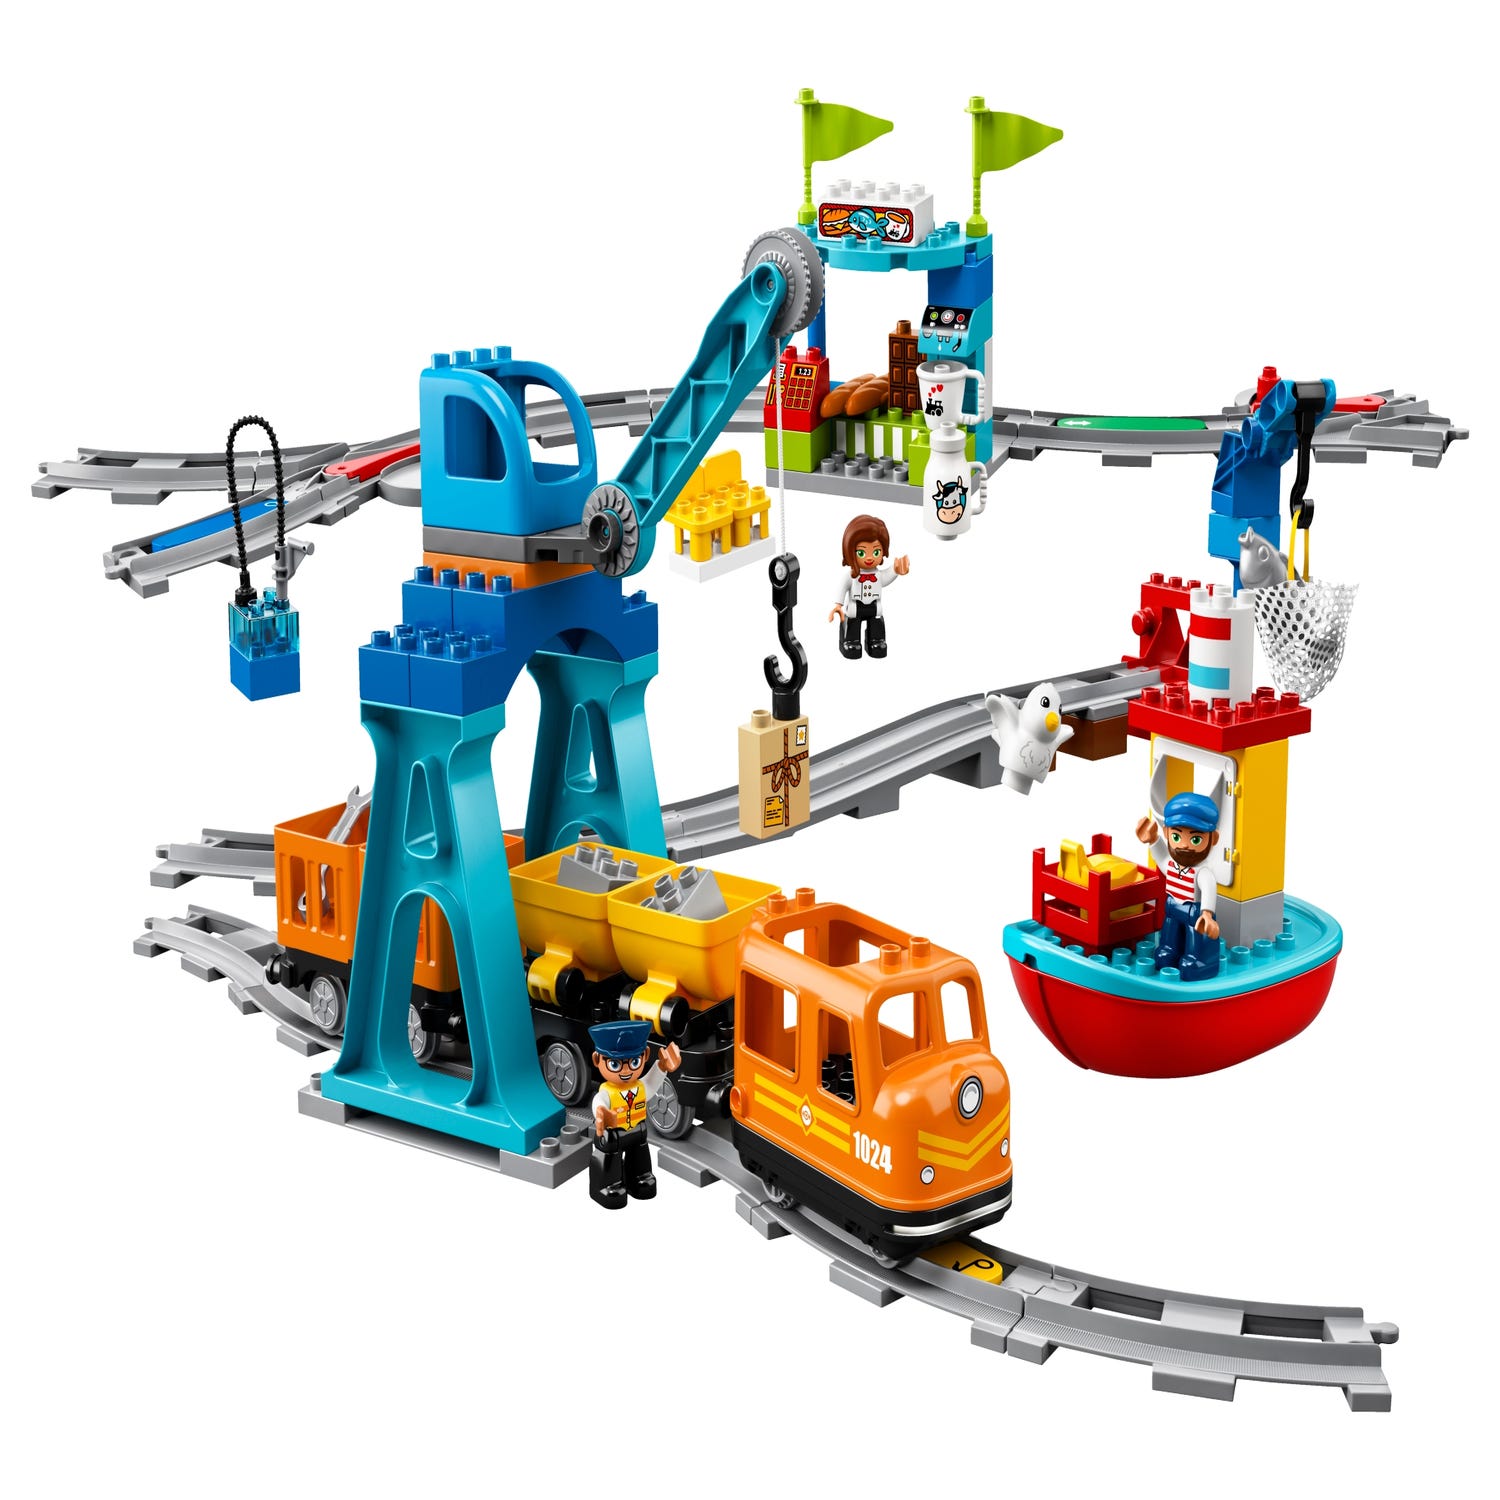 Cargo 10875 | DUPLO® | Buy at the Official LEGO® Shop US